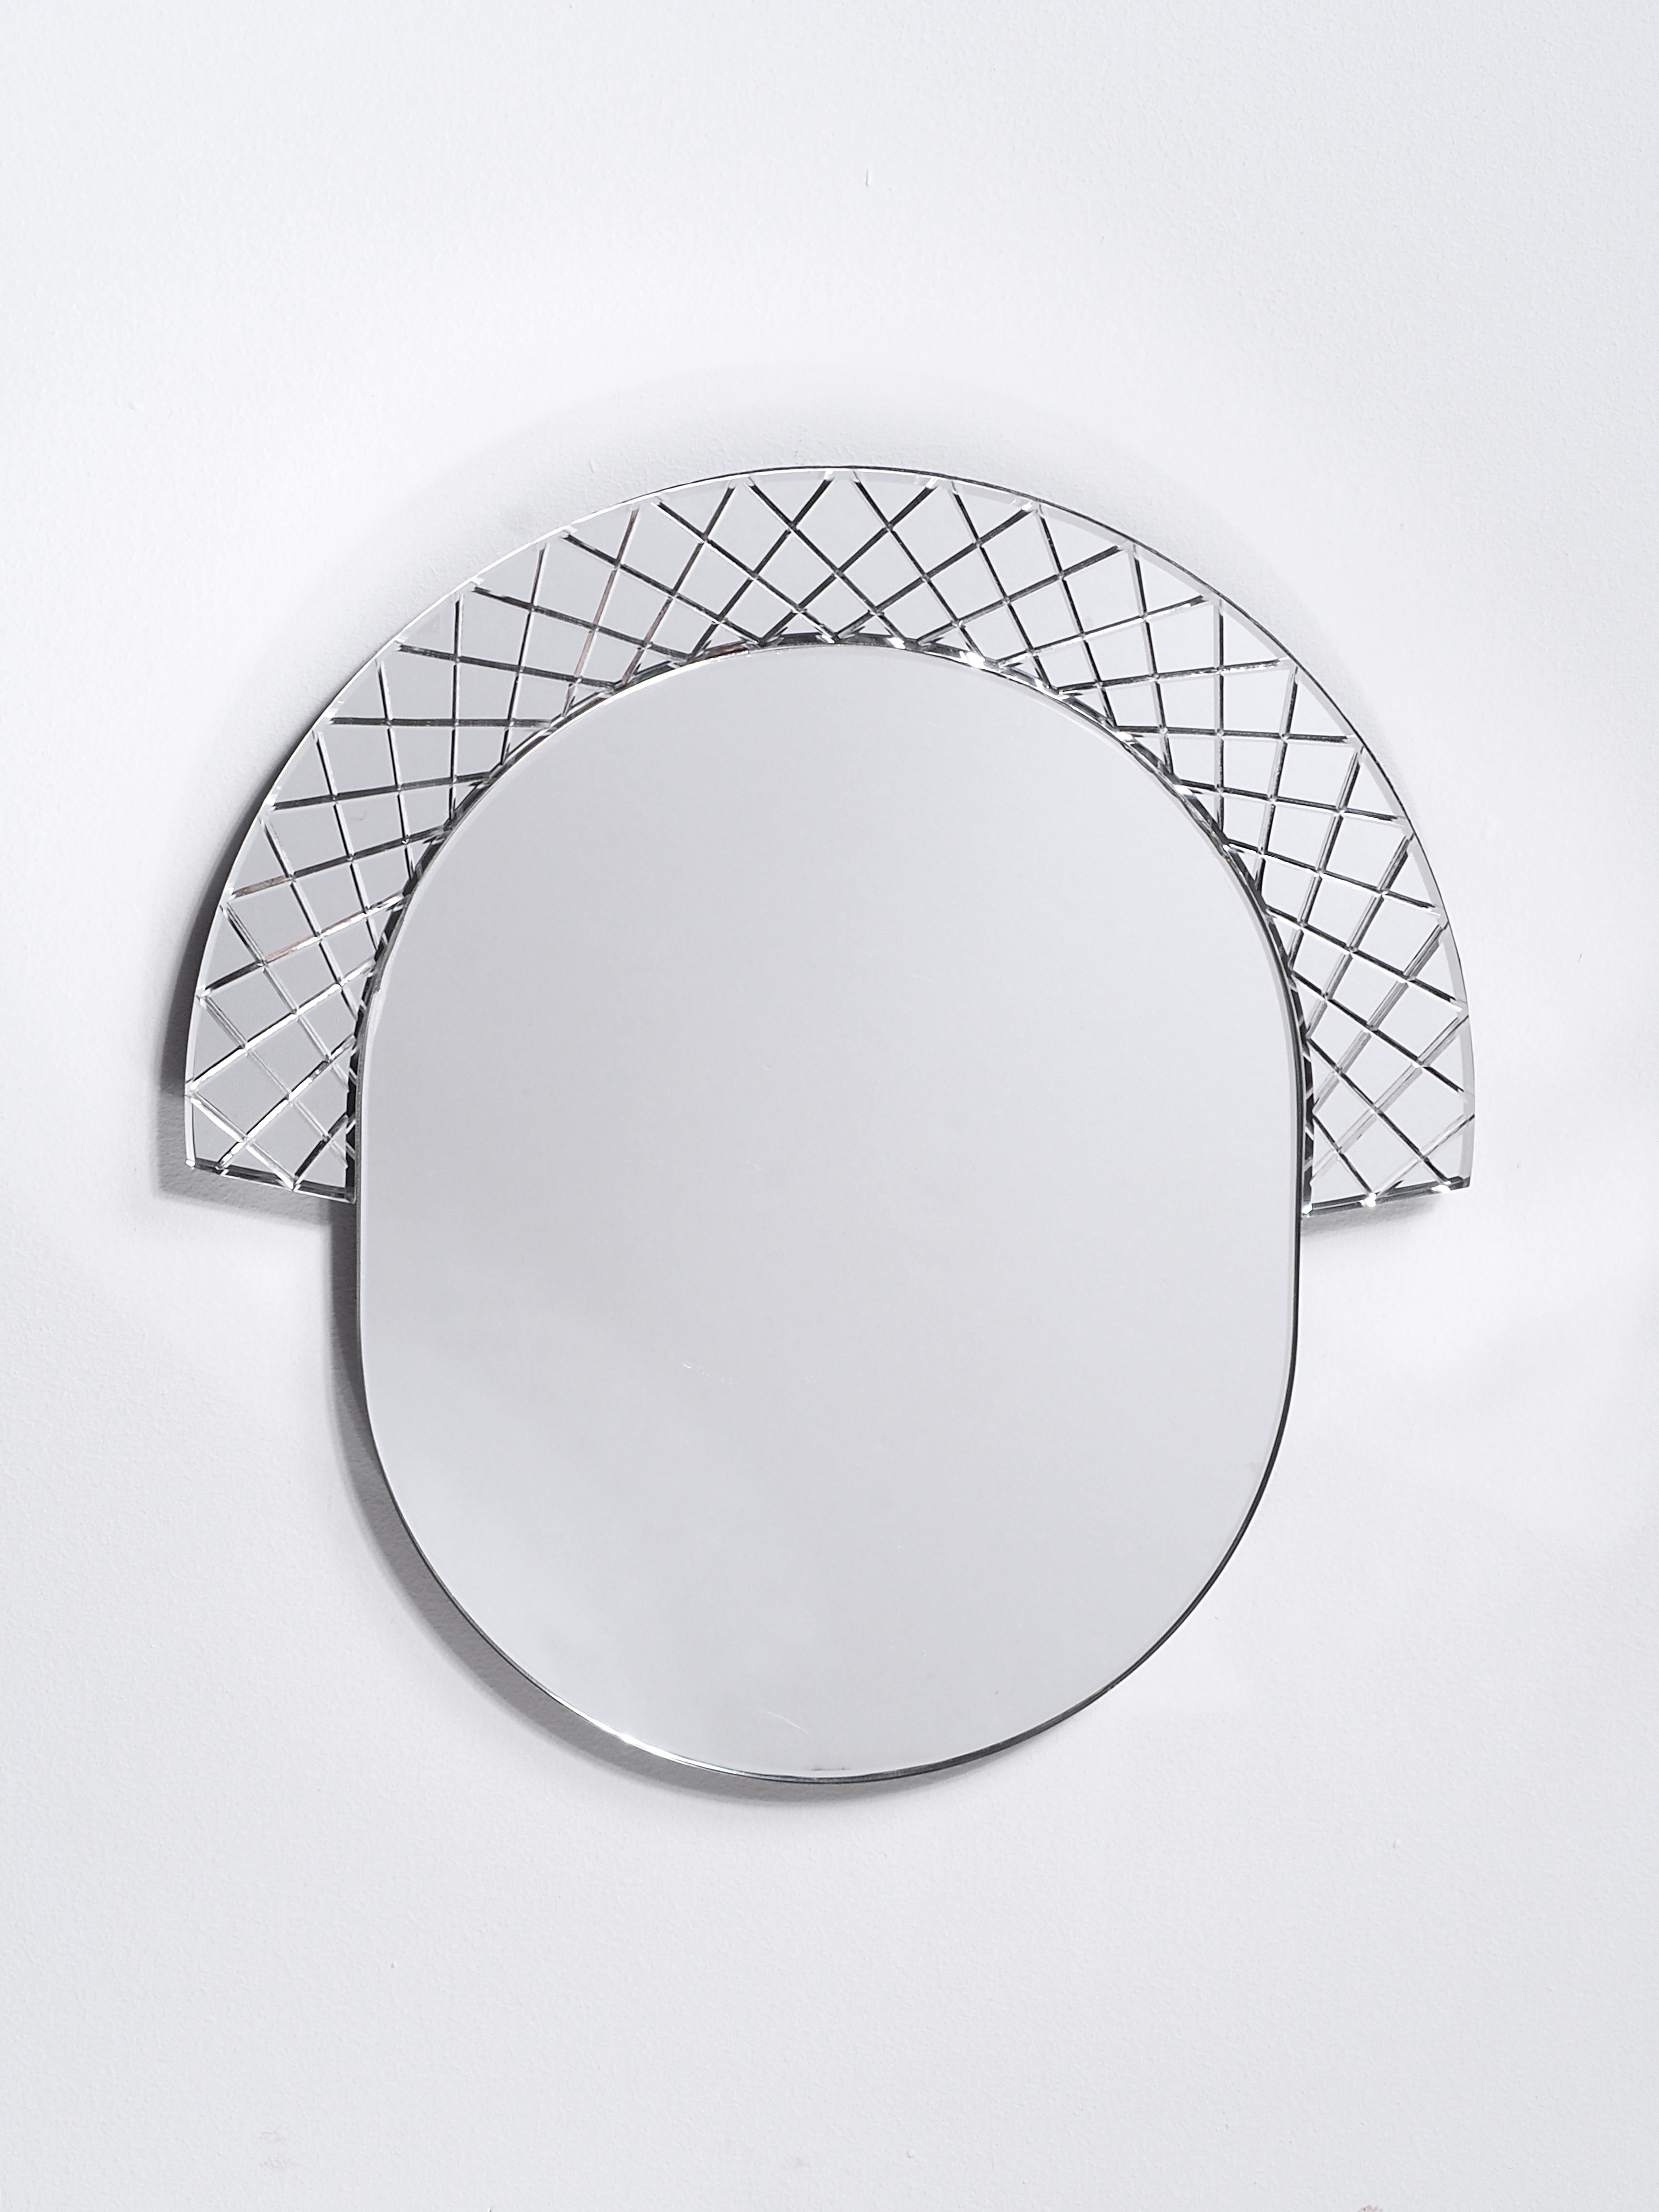 Large Scena Elemento Uno Murano Mirror by Nikolai Kotlarczyk.
Dimensions: D 3 x W 67 x H 65 cm. 
Materials: silvered carved glass, dark grey wood back.
Also available in other sizes and designs. 


Elemento is a series of solid glass mirrors